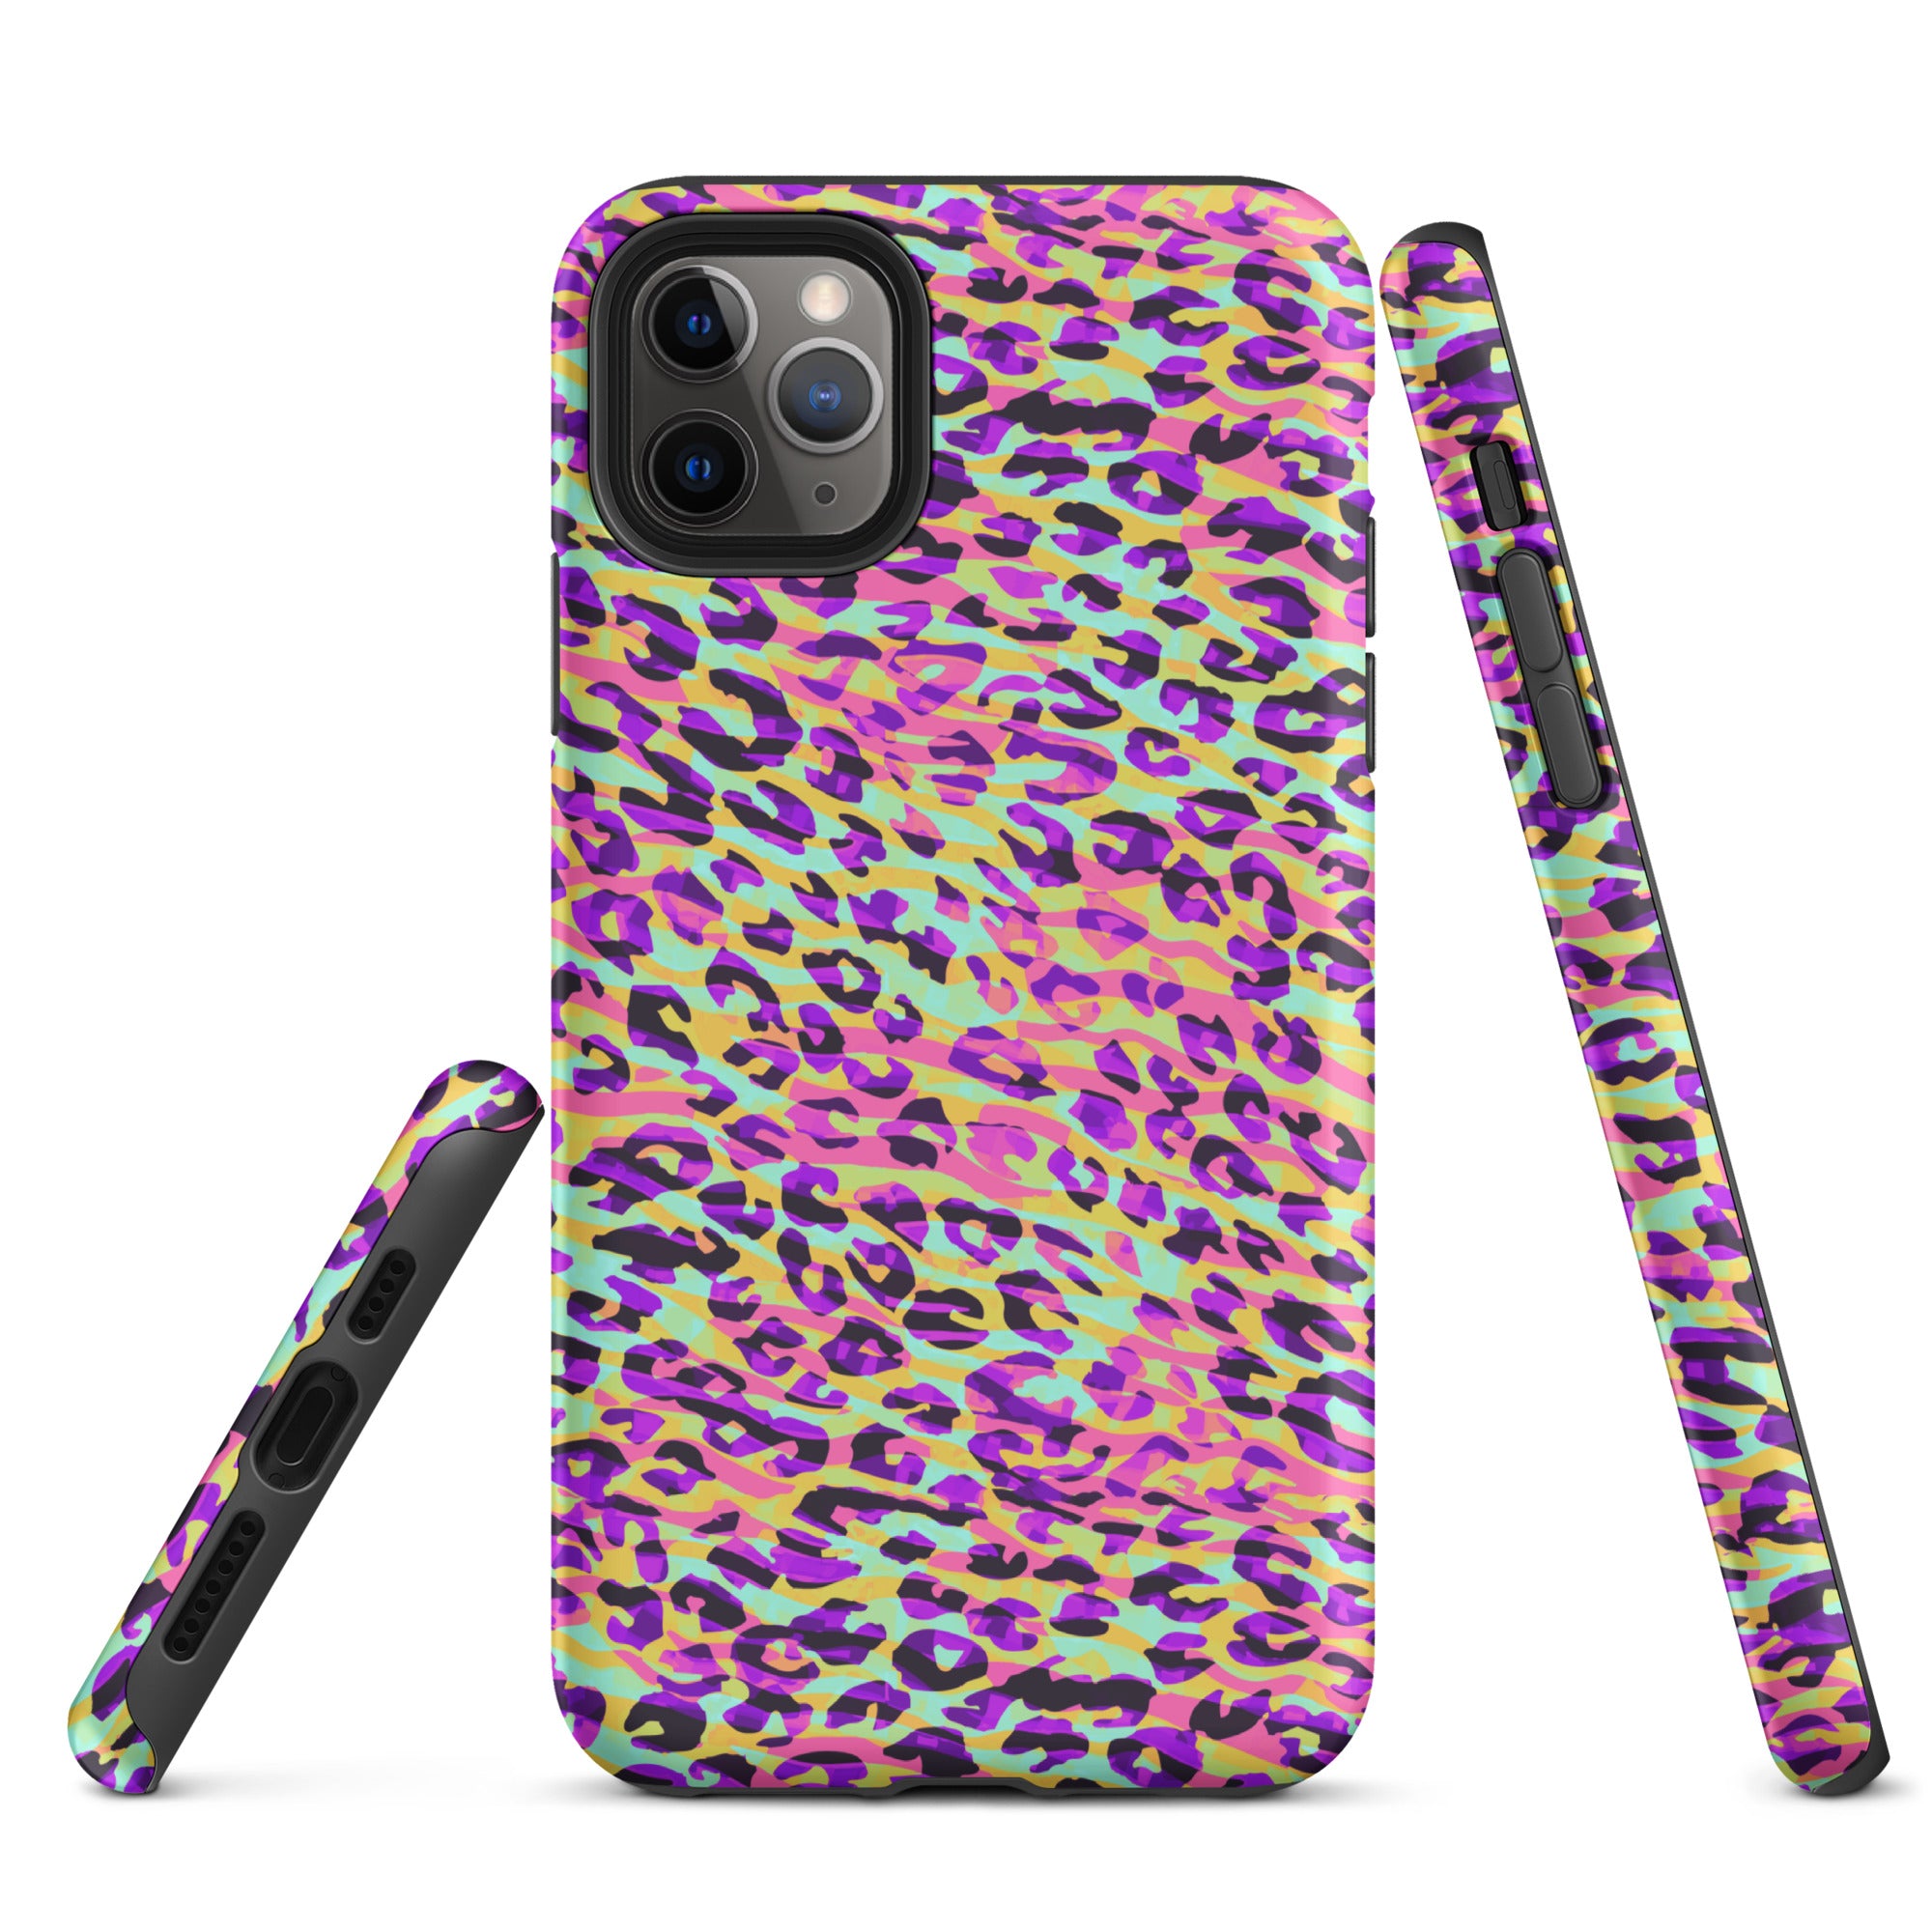 Tough Case for iPhone®- Zebra and Leopard Print Pink with Yellow